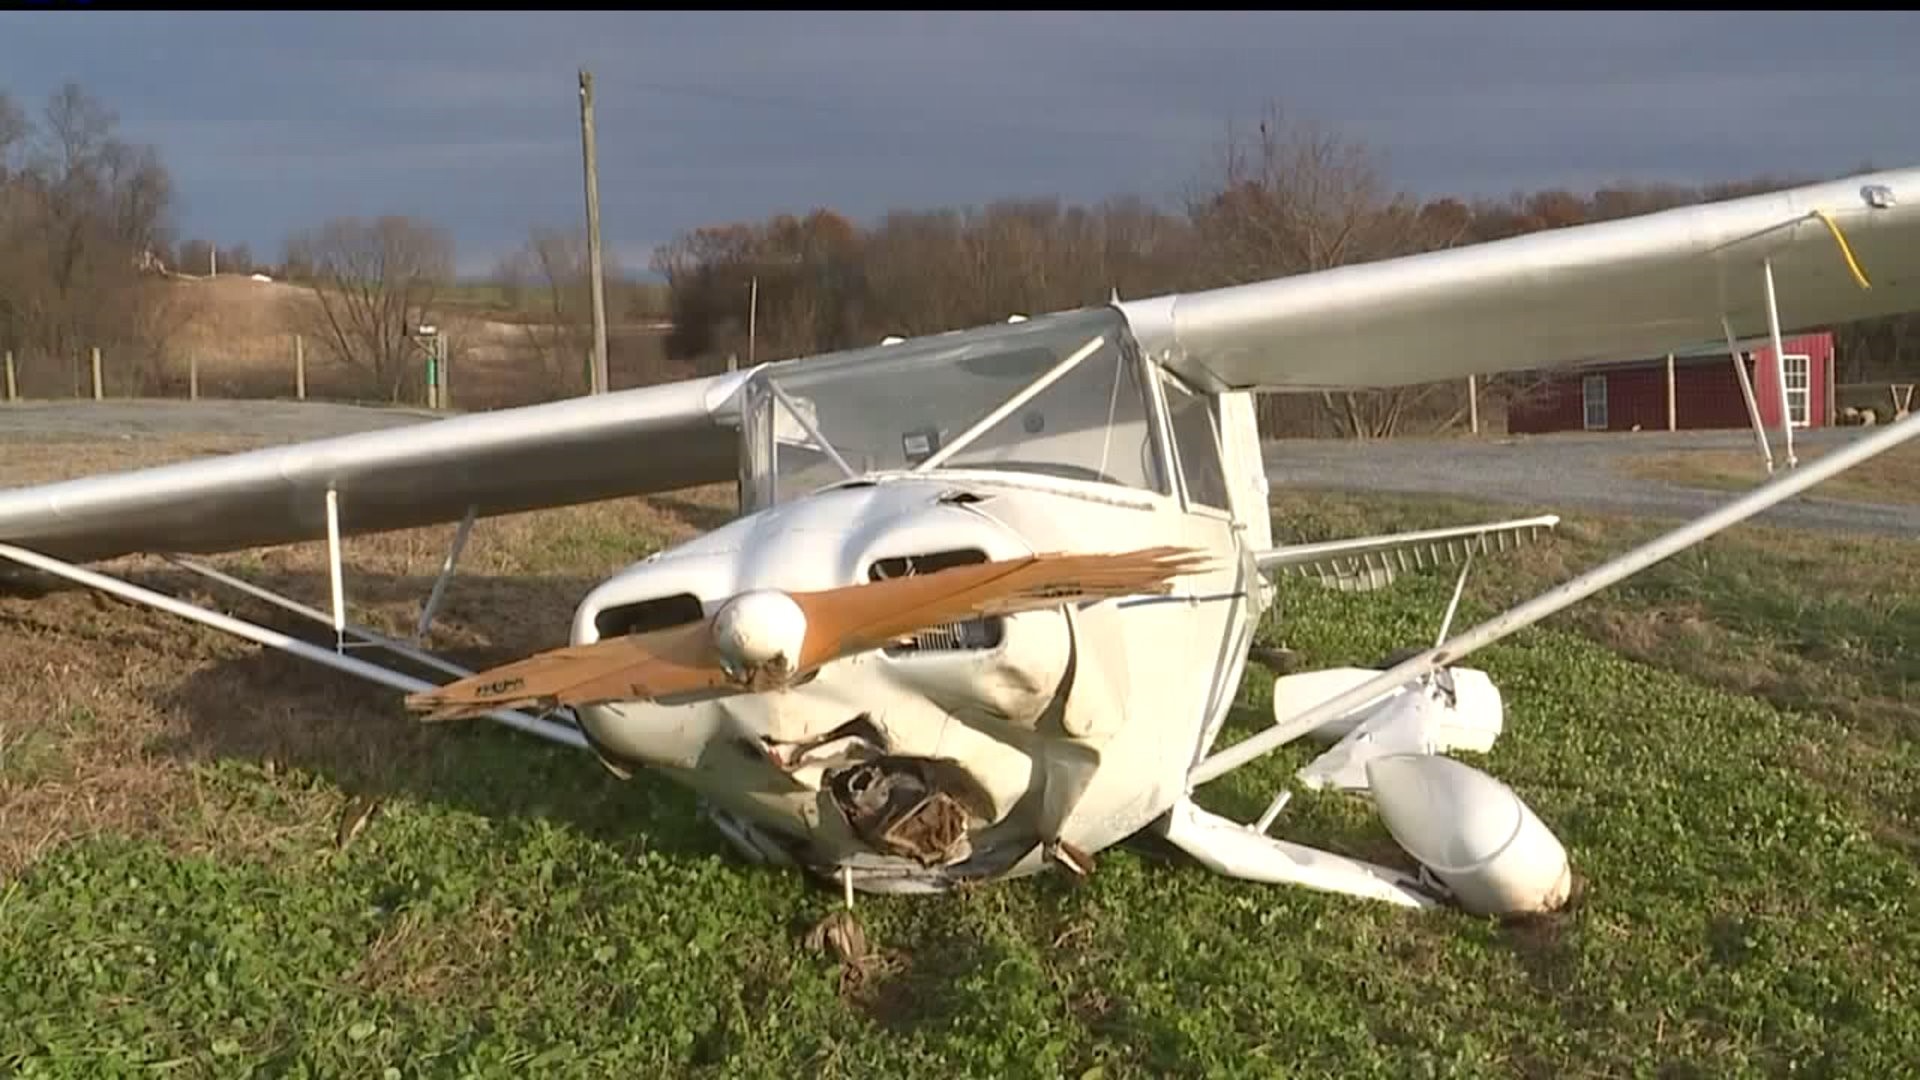 Officials: Pilot nowhere to be found after small plane crash in York County